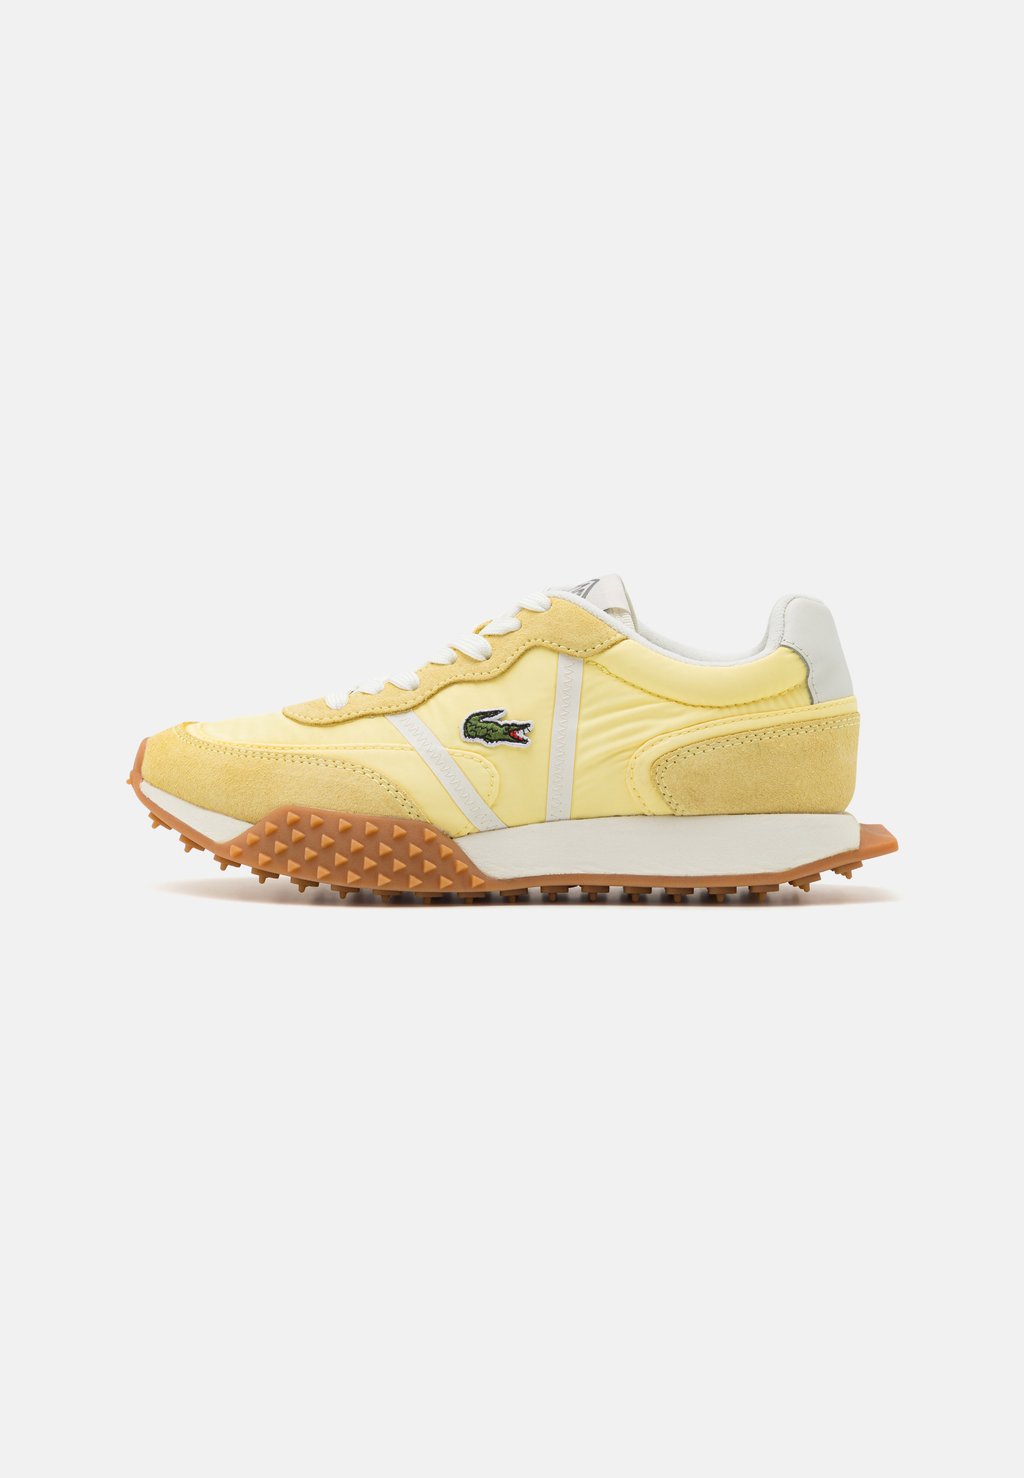 Кроссовки низкие L-SPIN DELUXE 3.0 Lacoste, цвет light yellow/off white кроссовки lacoste l spin deluxe 2 цвет light pink white